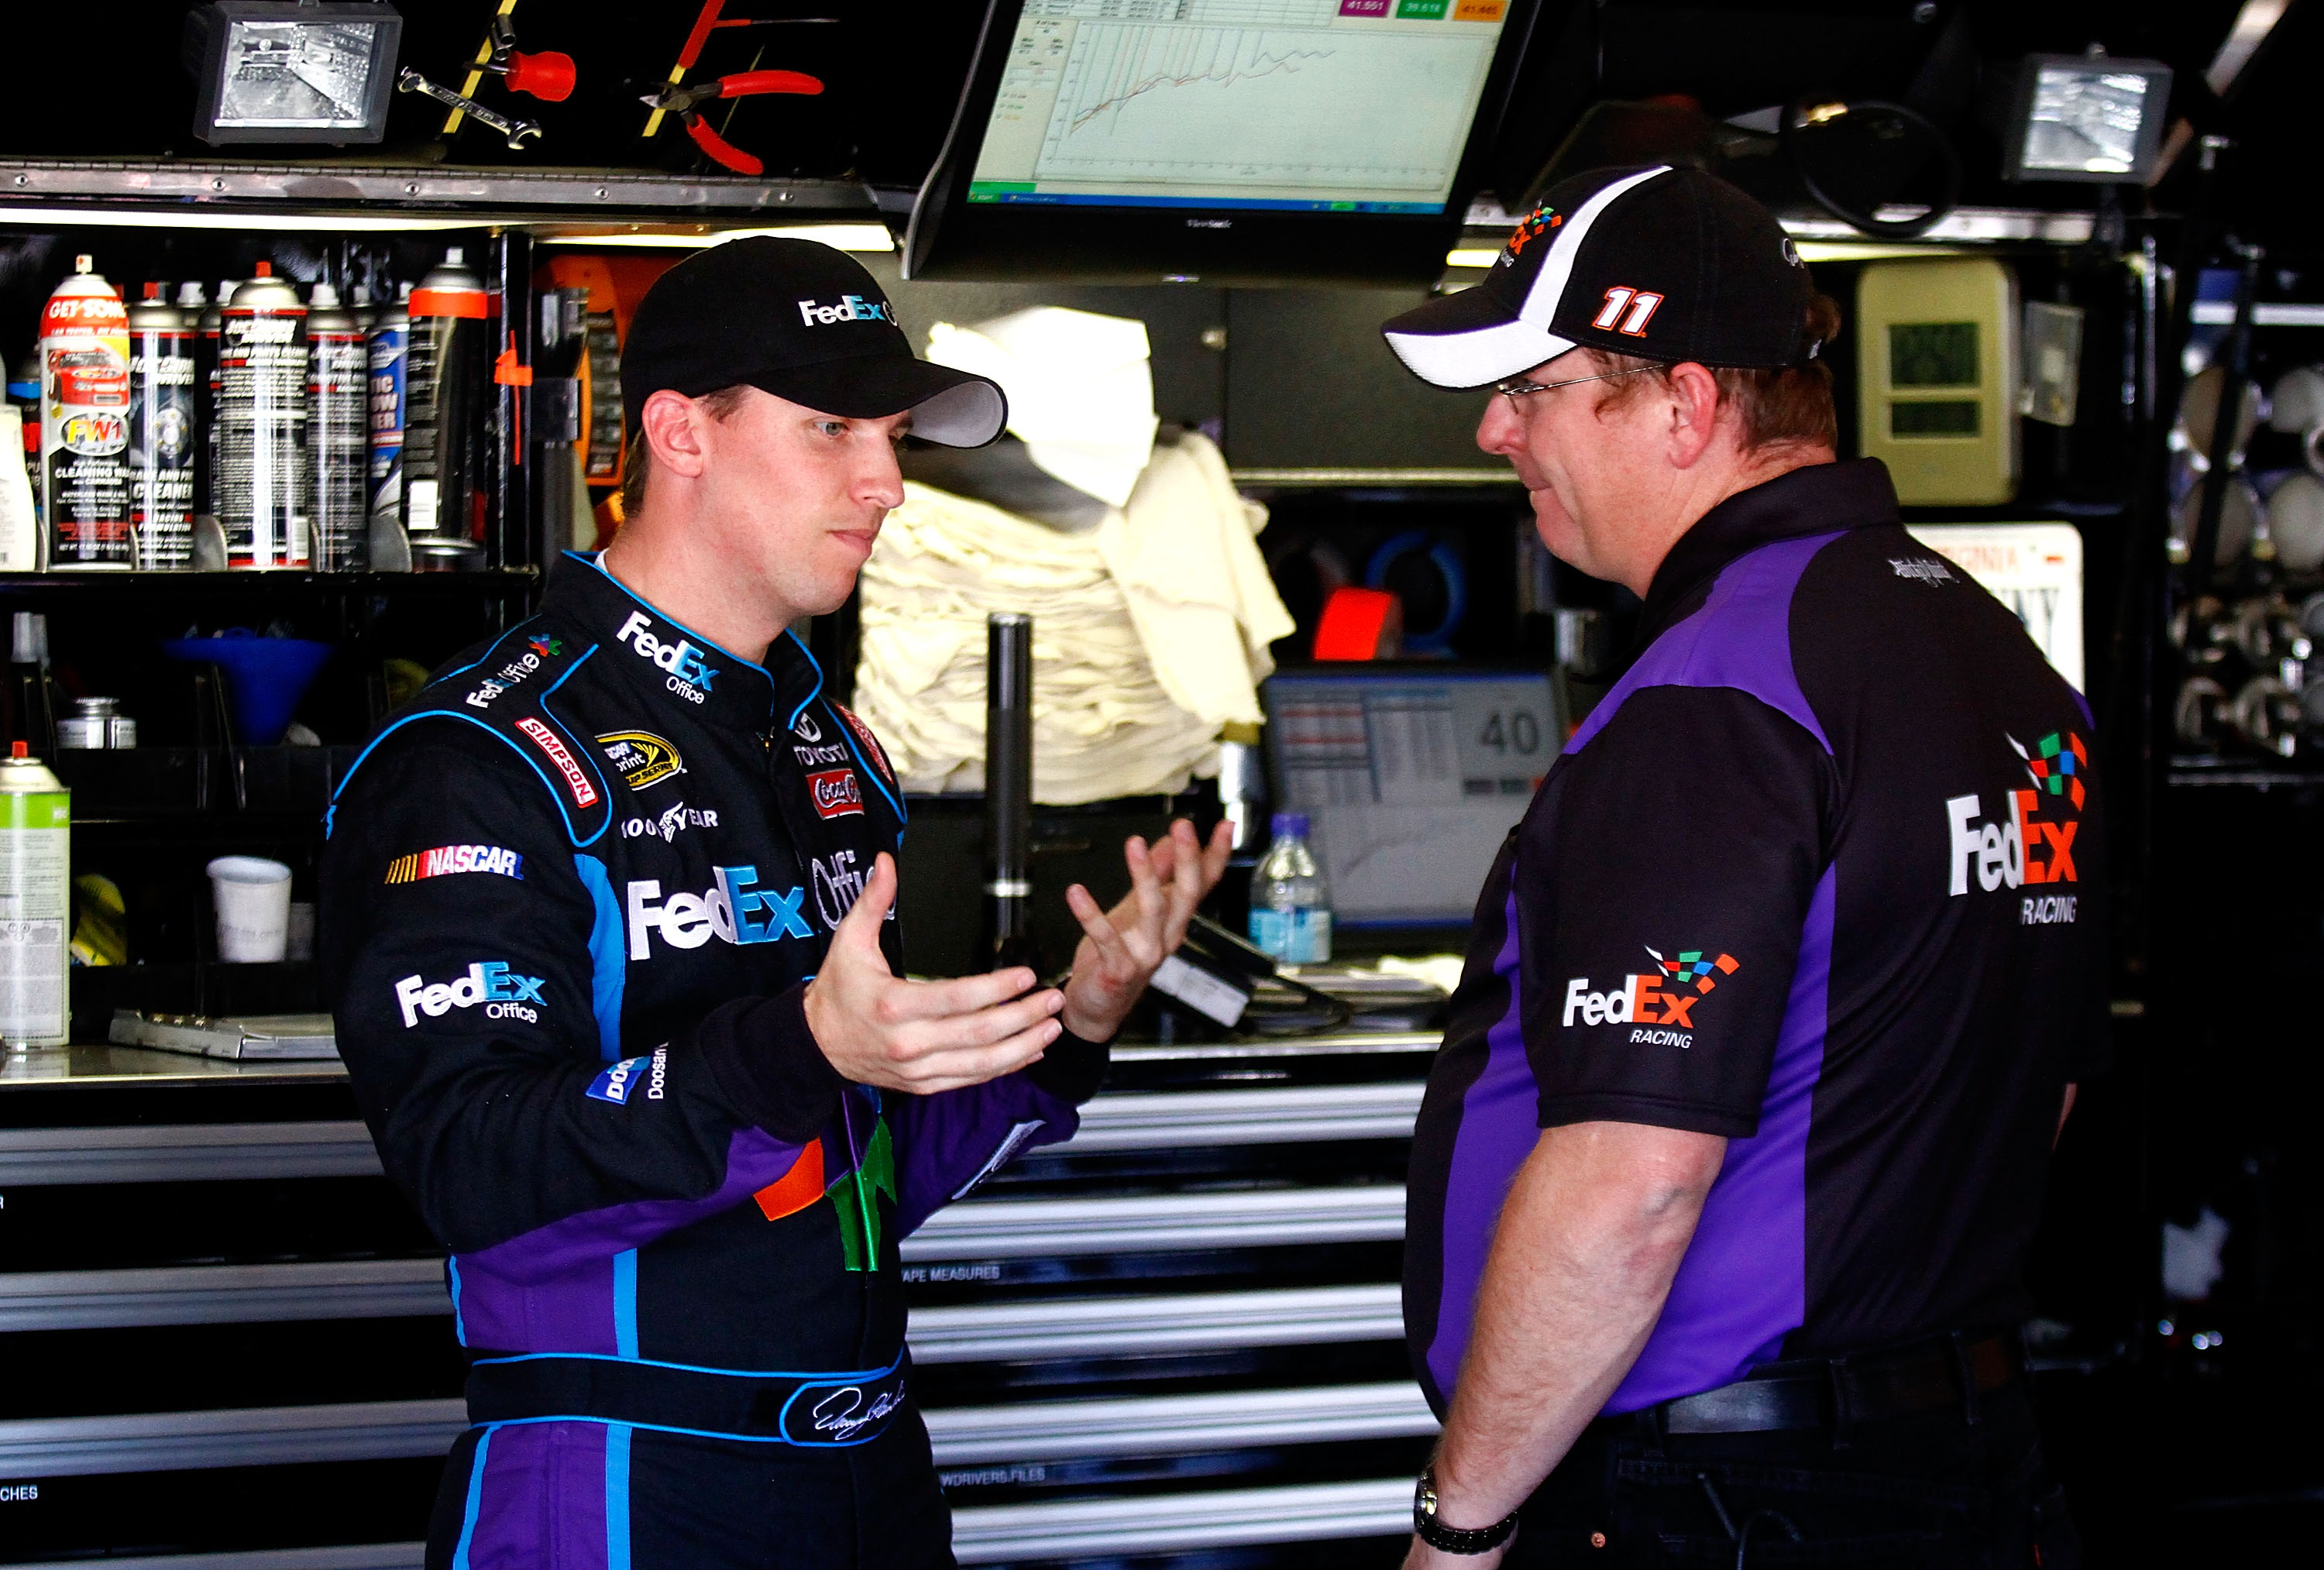 FONTANA, CA - OCTOBER 08:  (L-R) Denny Hamlin, driver of the #11 FedEx Office Toyota, speaks with crew chief Michael Ford during practice for the NASCAR Sprint Cup Series Pepsi Max 400 on October 8, 2010 in Fontana, California.  (Photo by Jason Smith/Gett